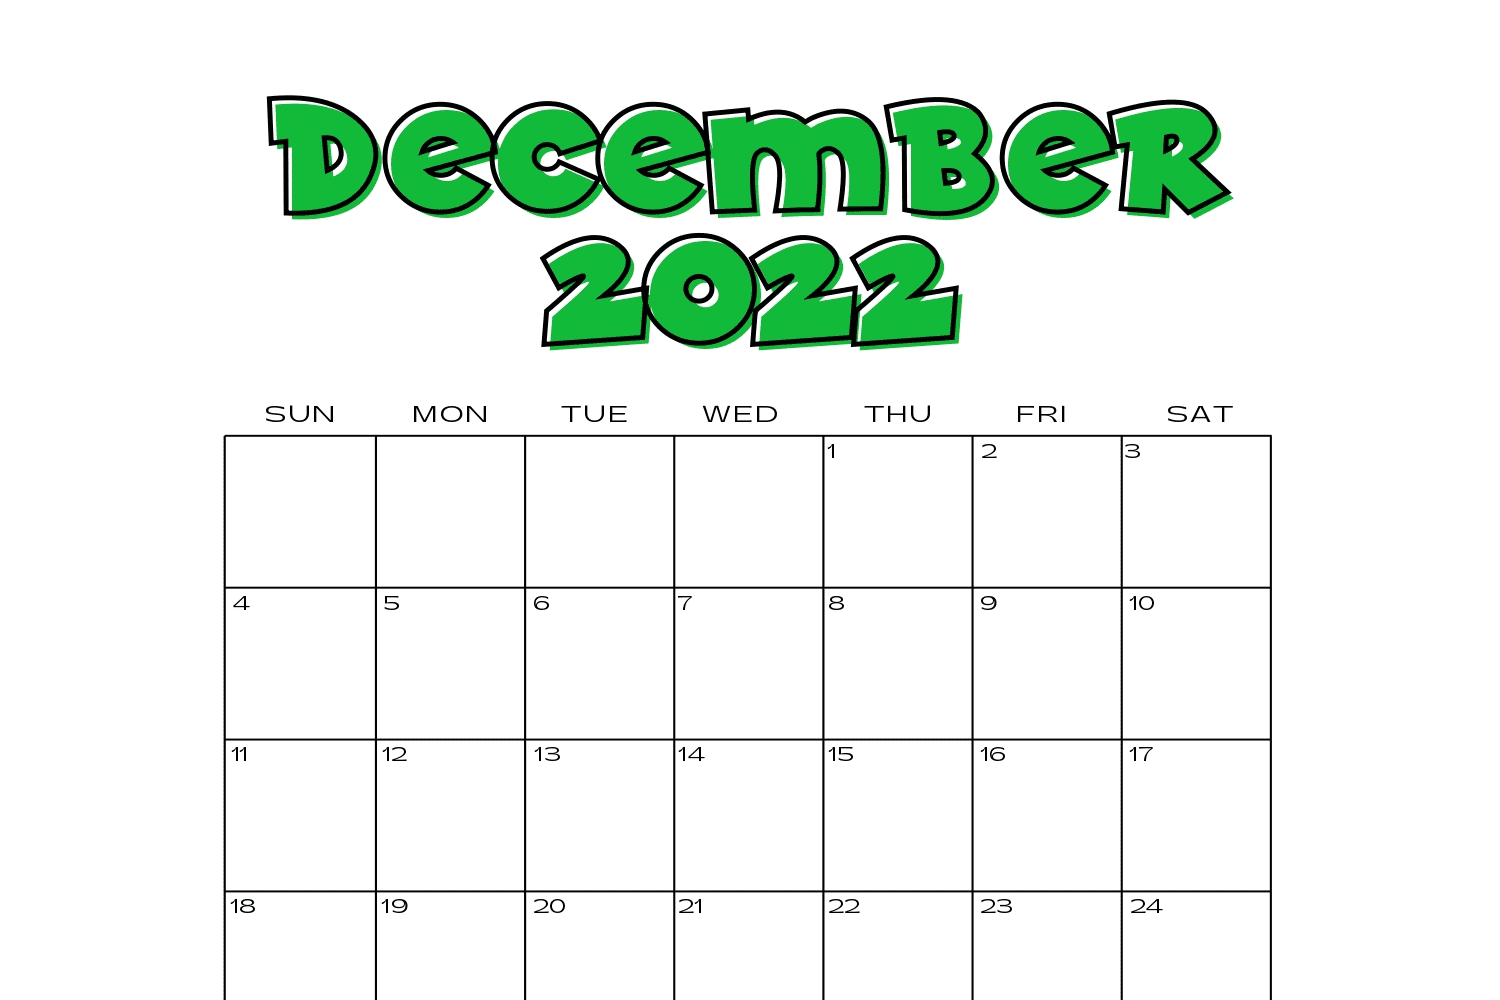 December calendar with big green letters and simple date table.